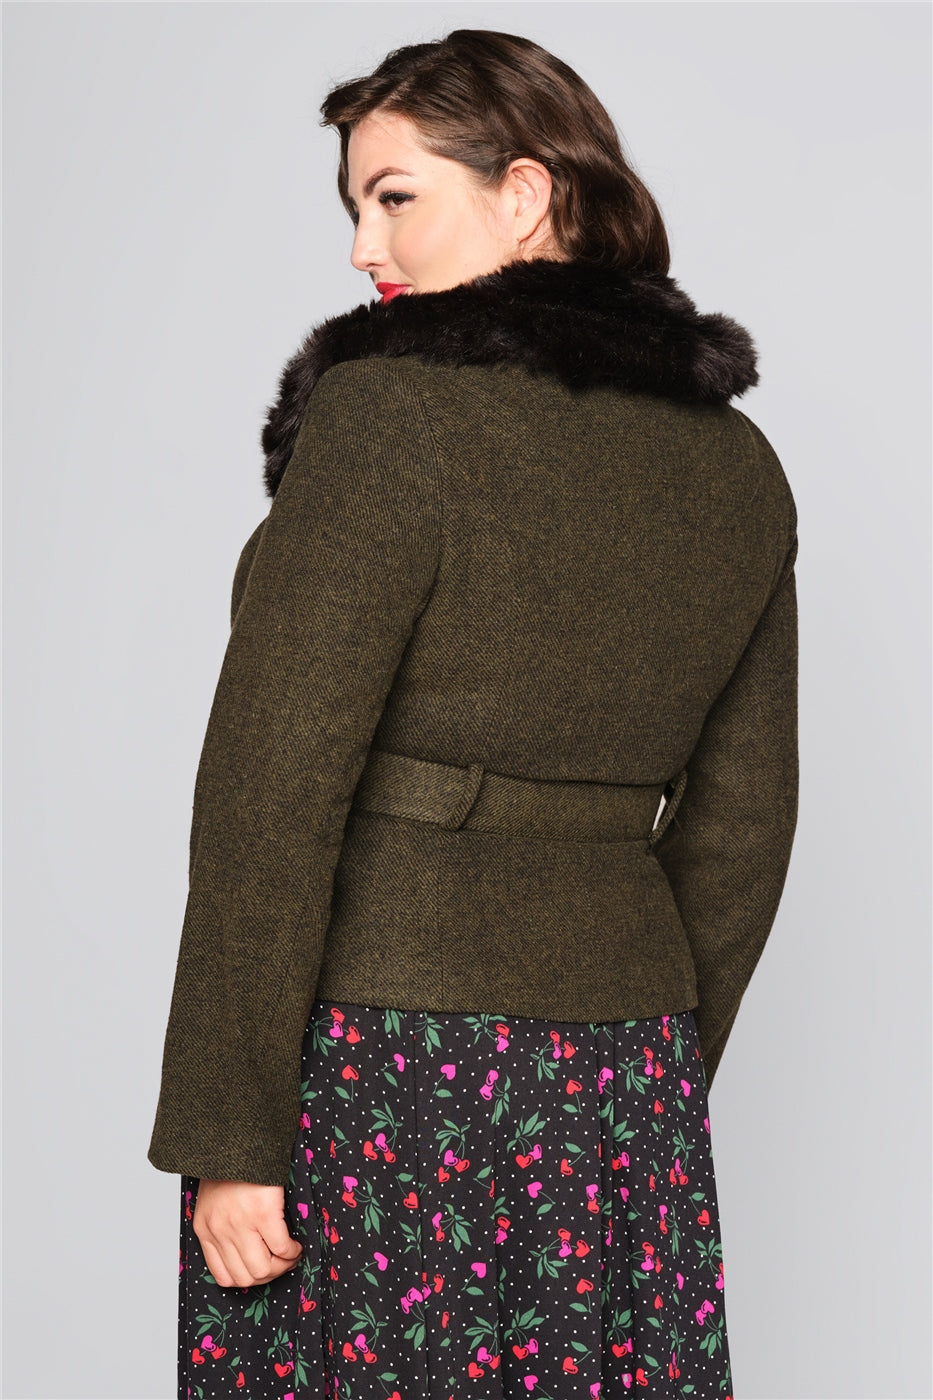 Plus size model with brown hair and 50s makeup wearing a fitted green jacket with black faux fur trim collar